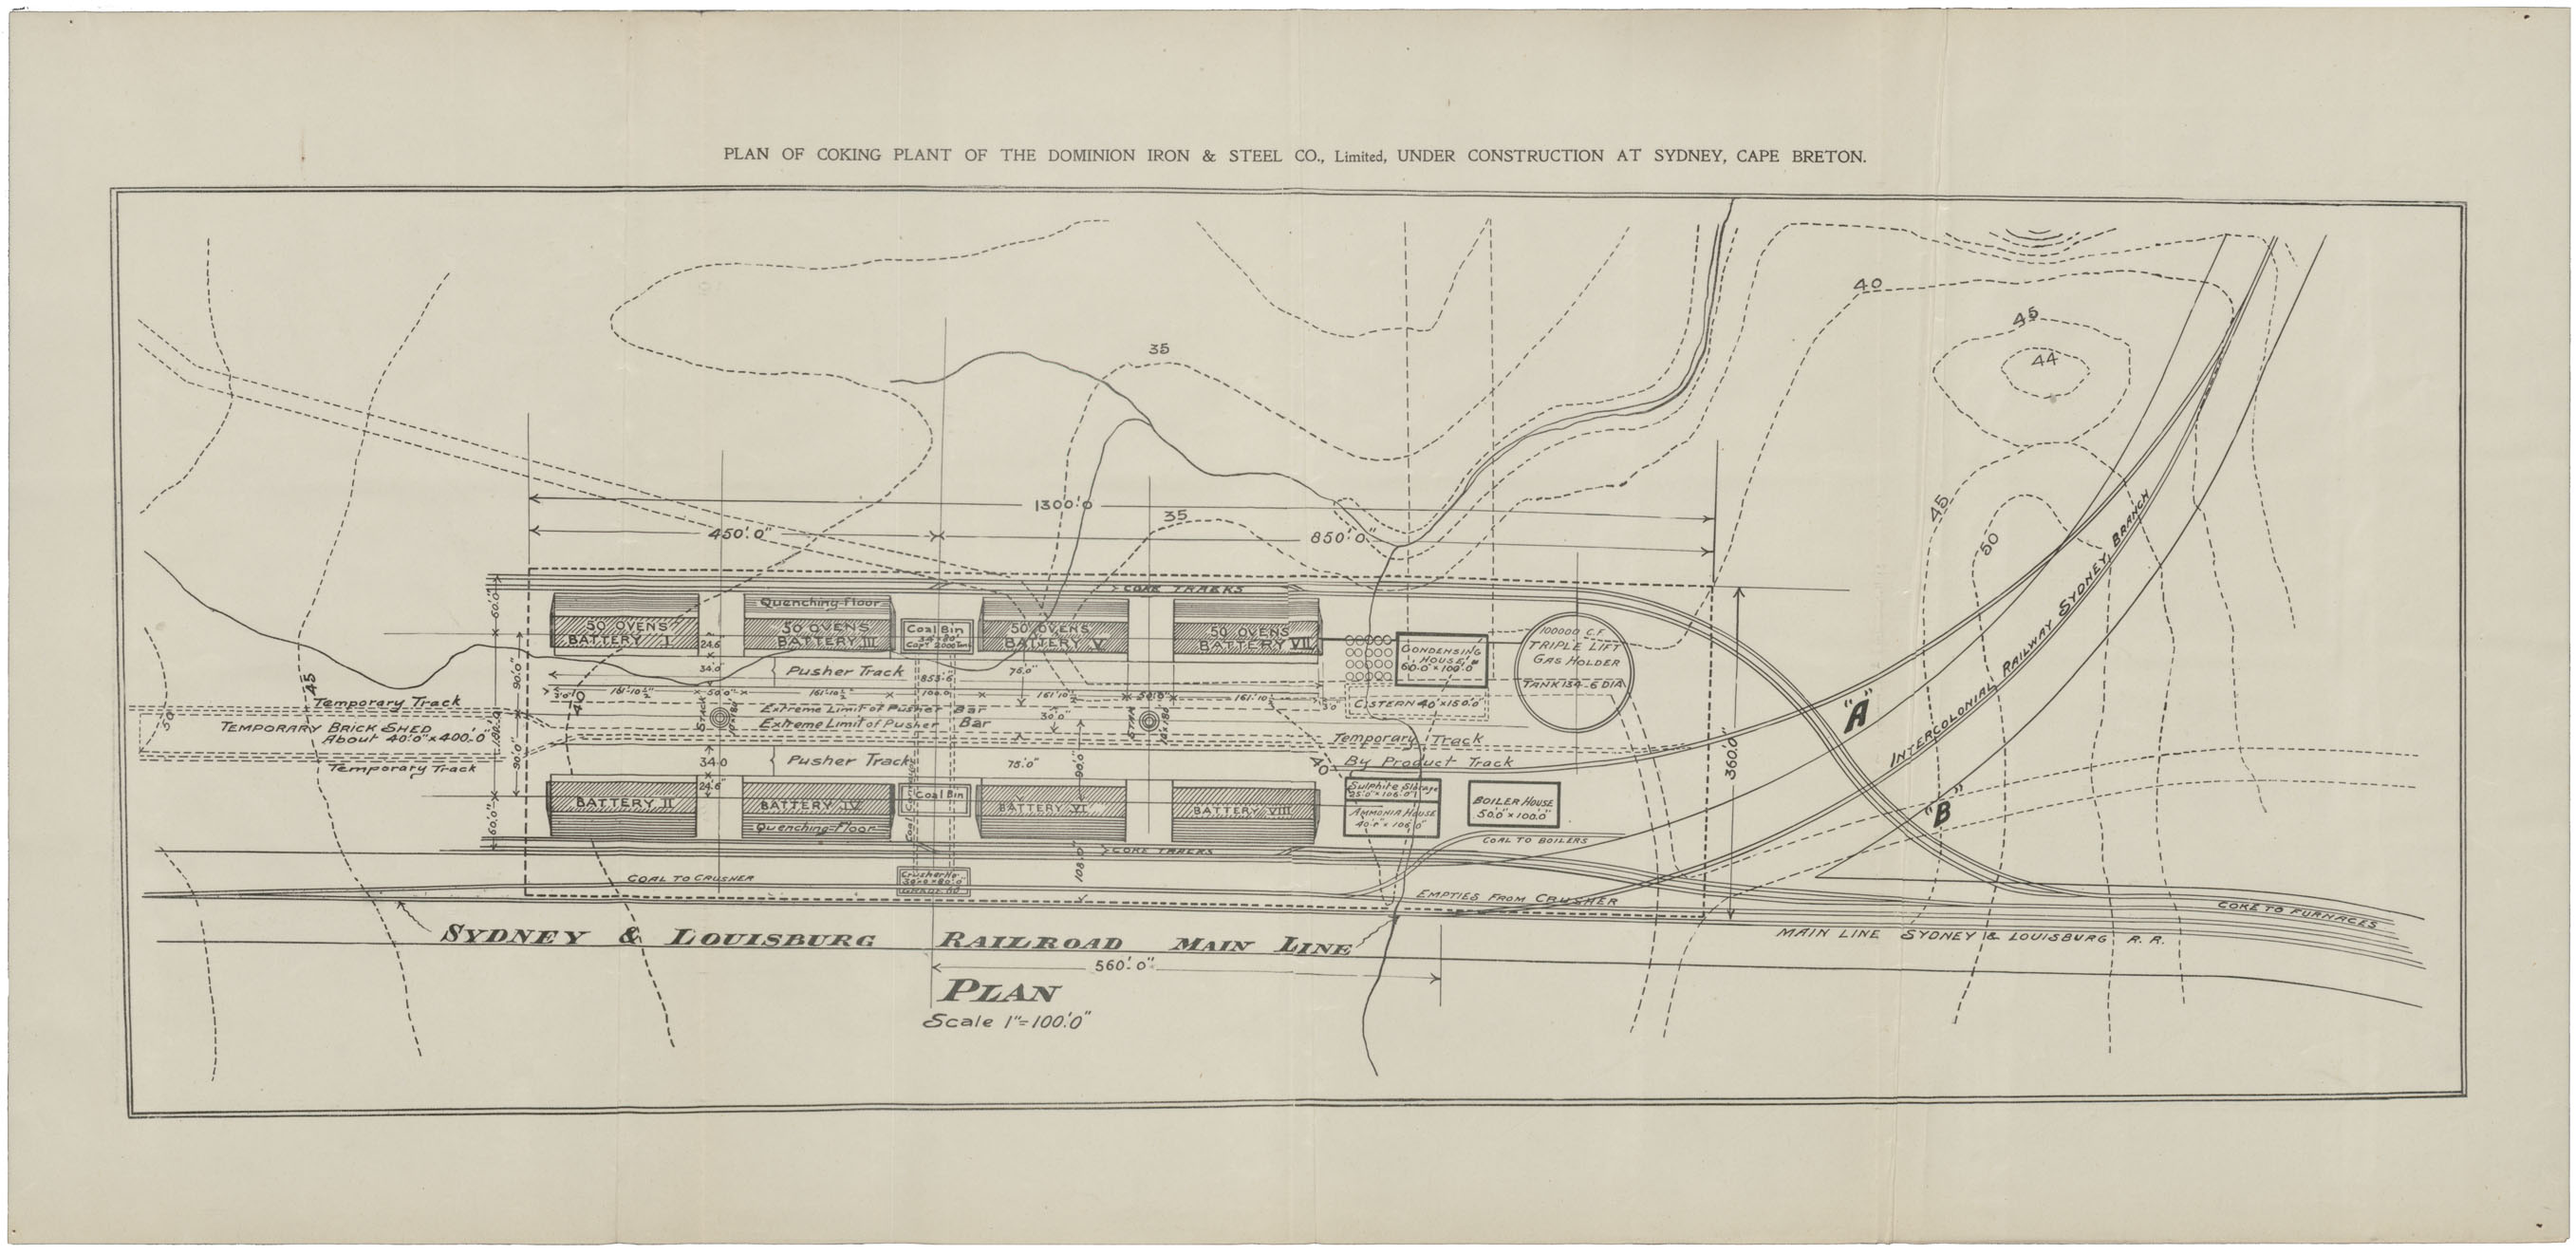 Plan of the Coking Plant of Dominion Iron & Steel County Ltd. At Sydney, Cape Breton